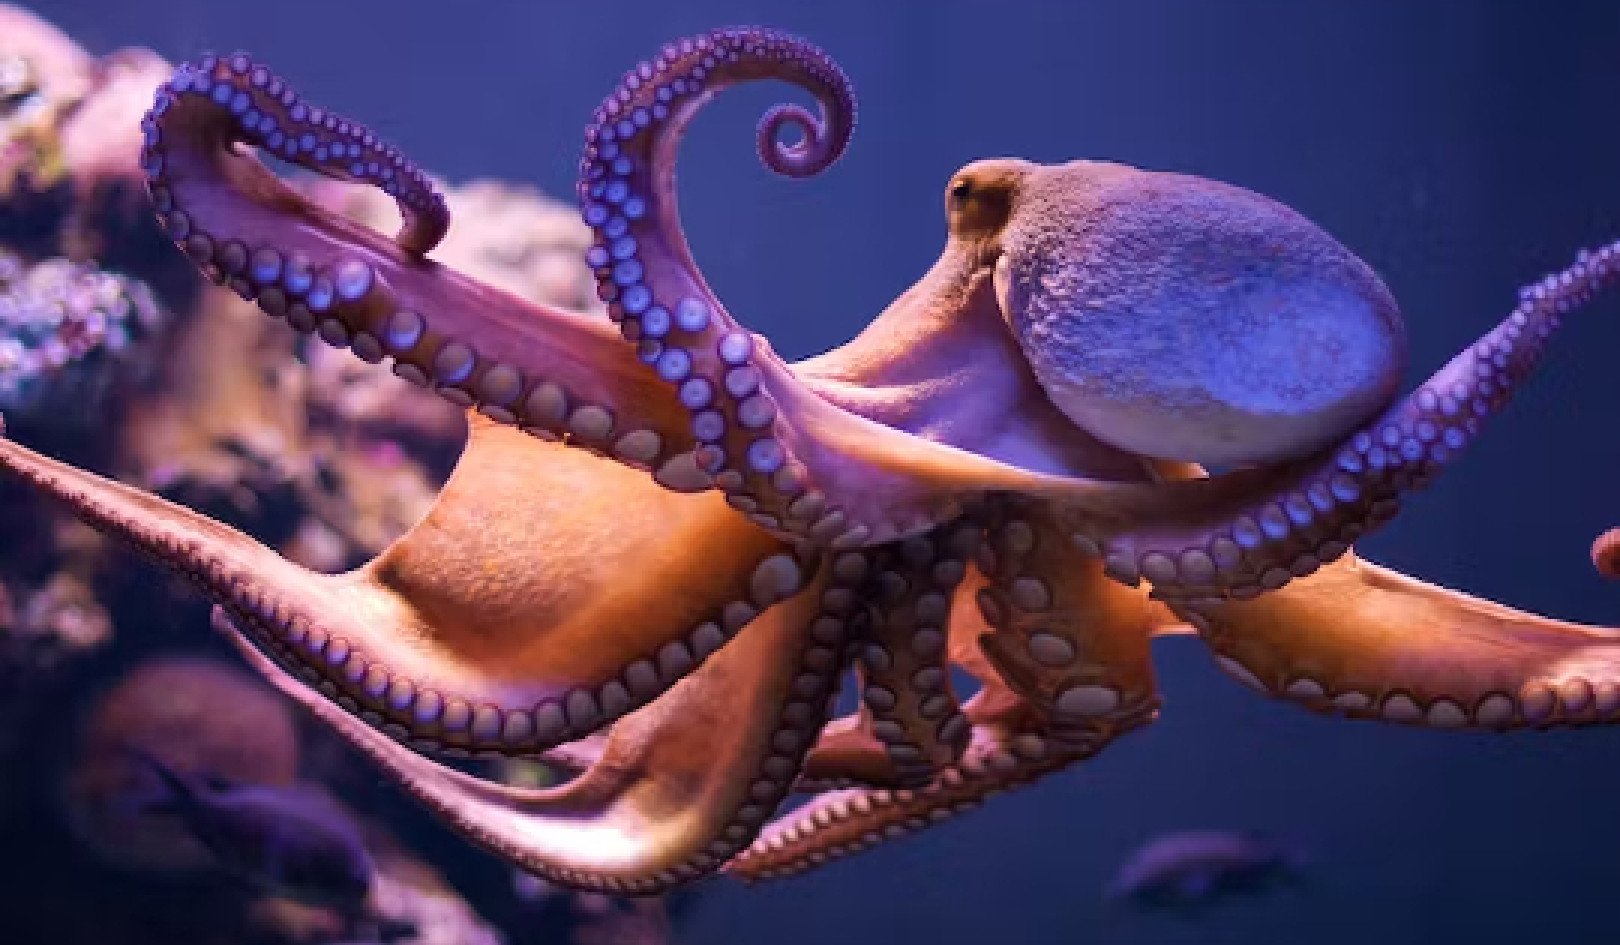 Suckers for Learning: Why Octopuses Are So Intelligent